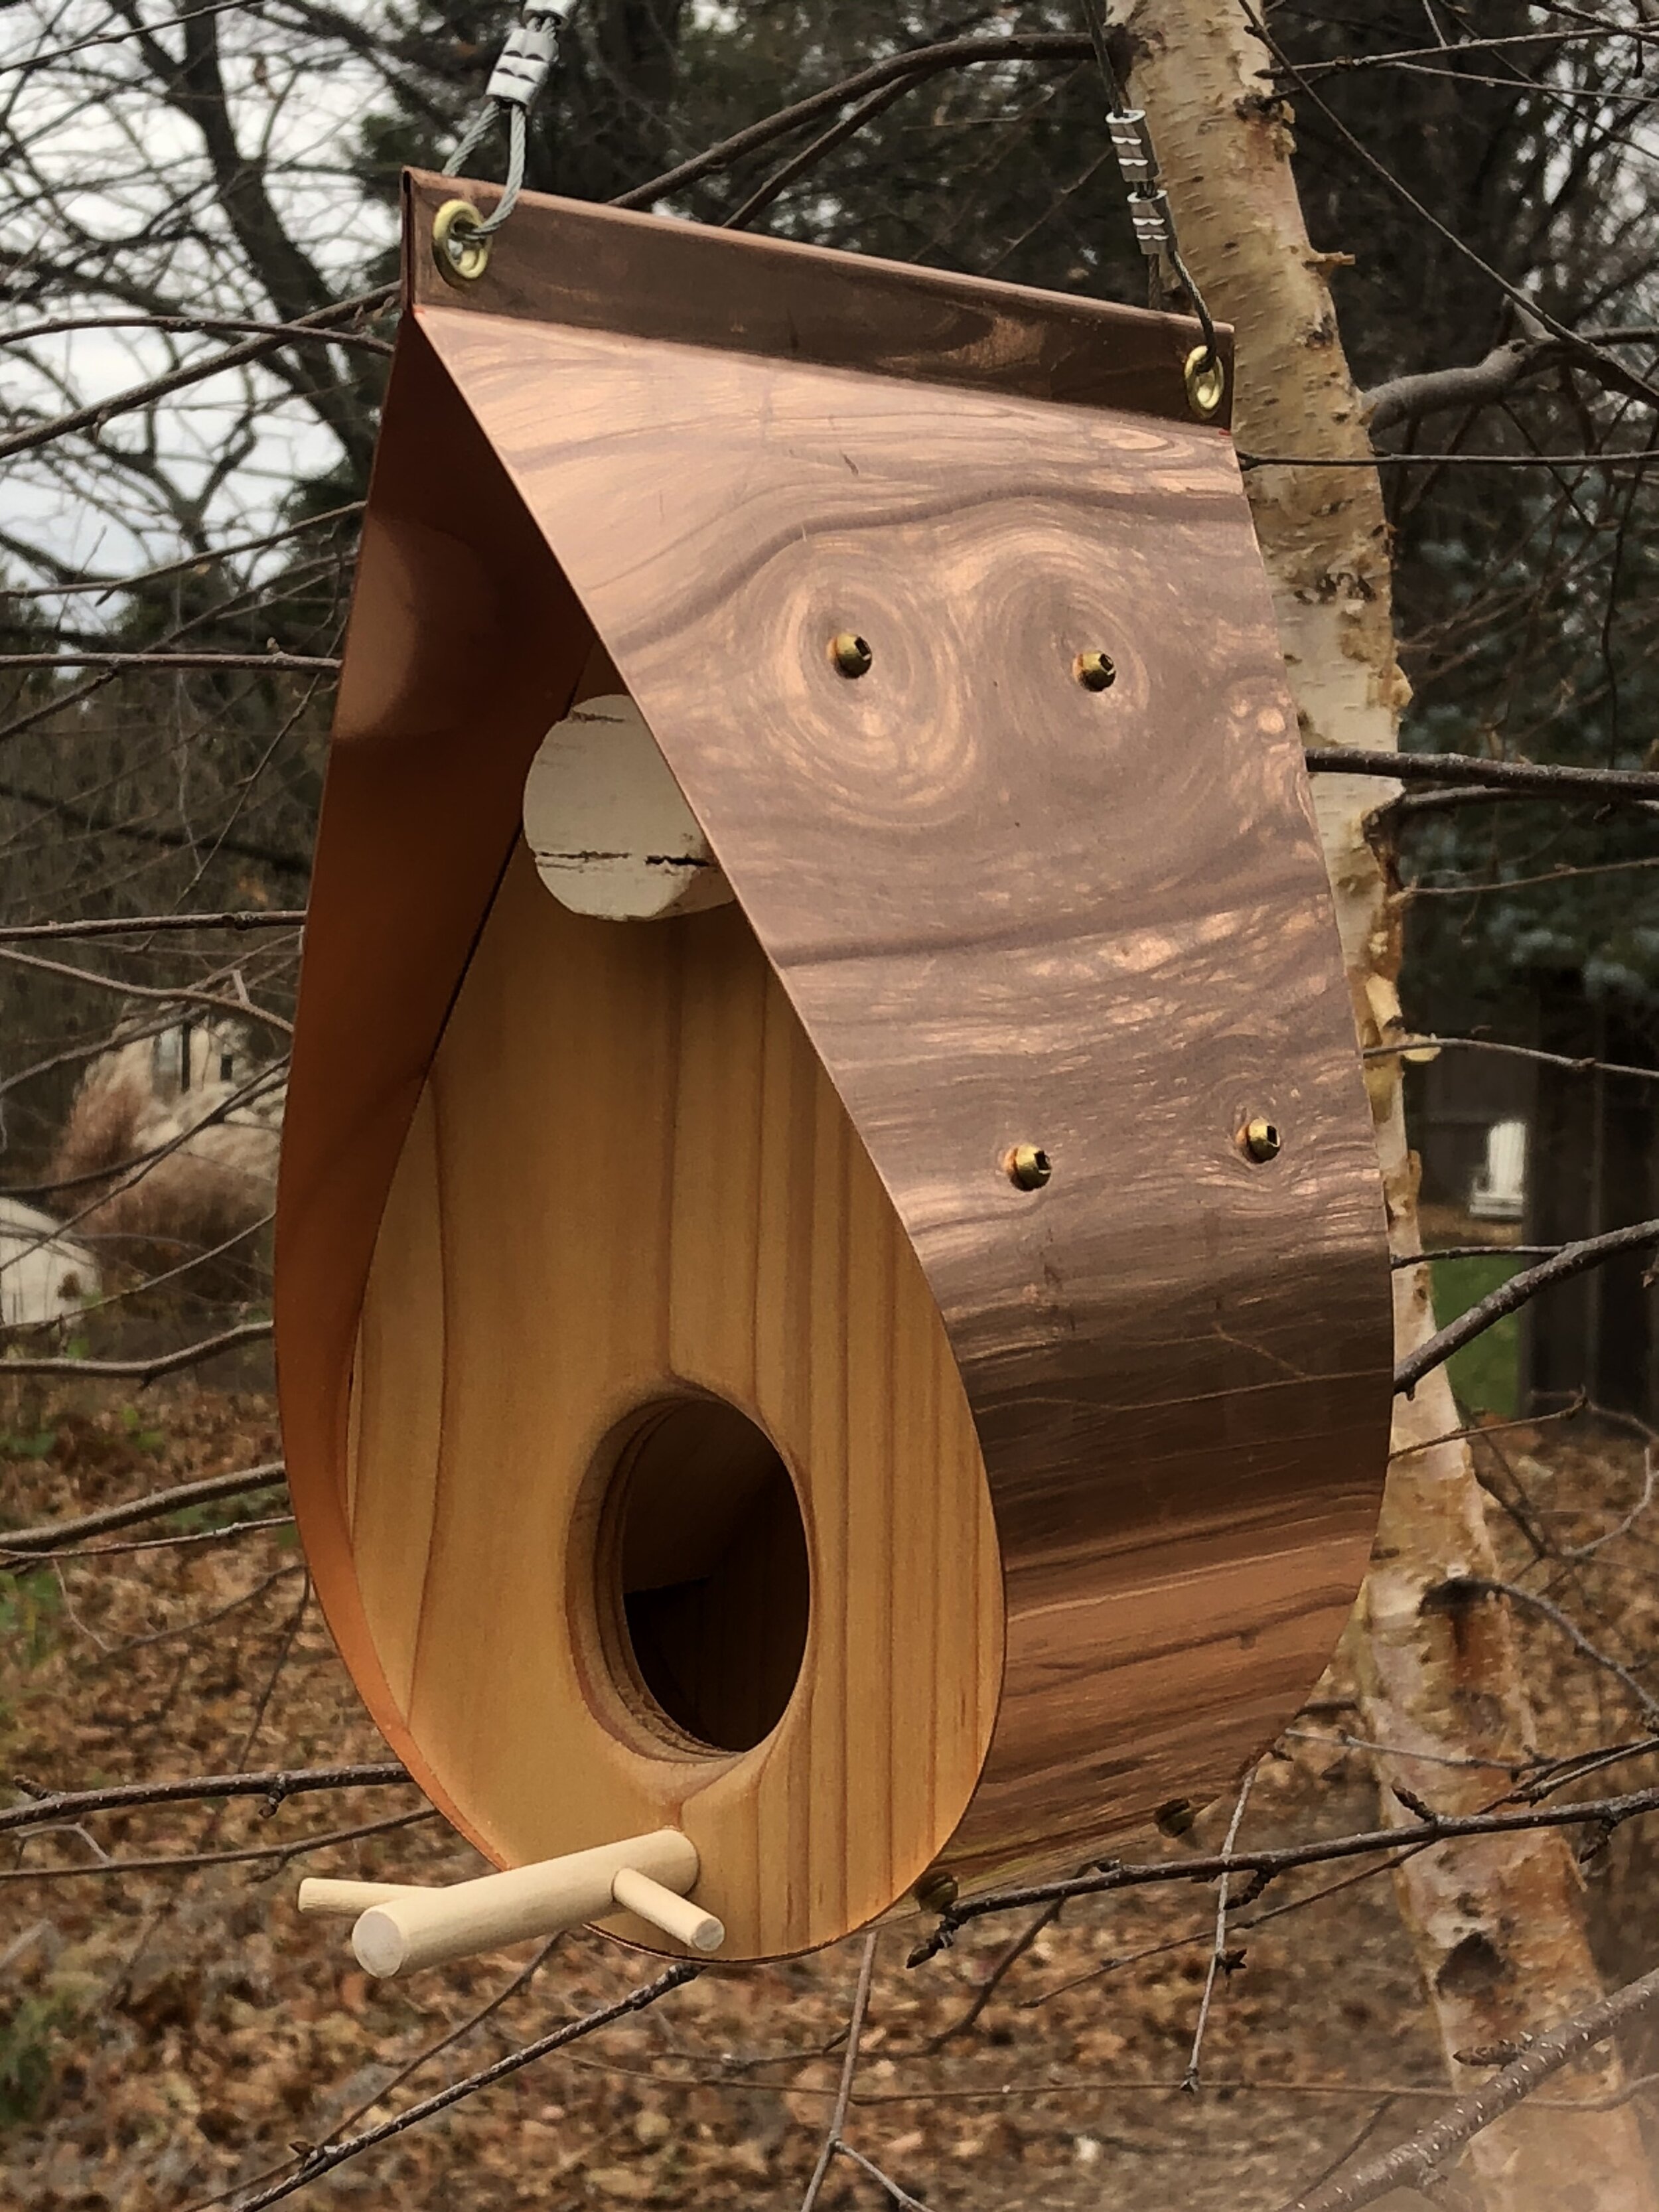 The ultimate bird feeder made with copper and cedar.